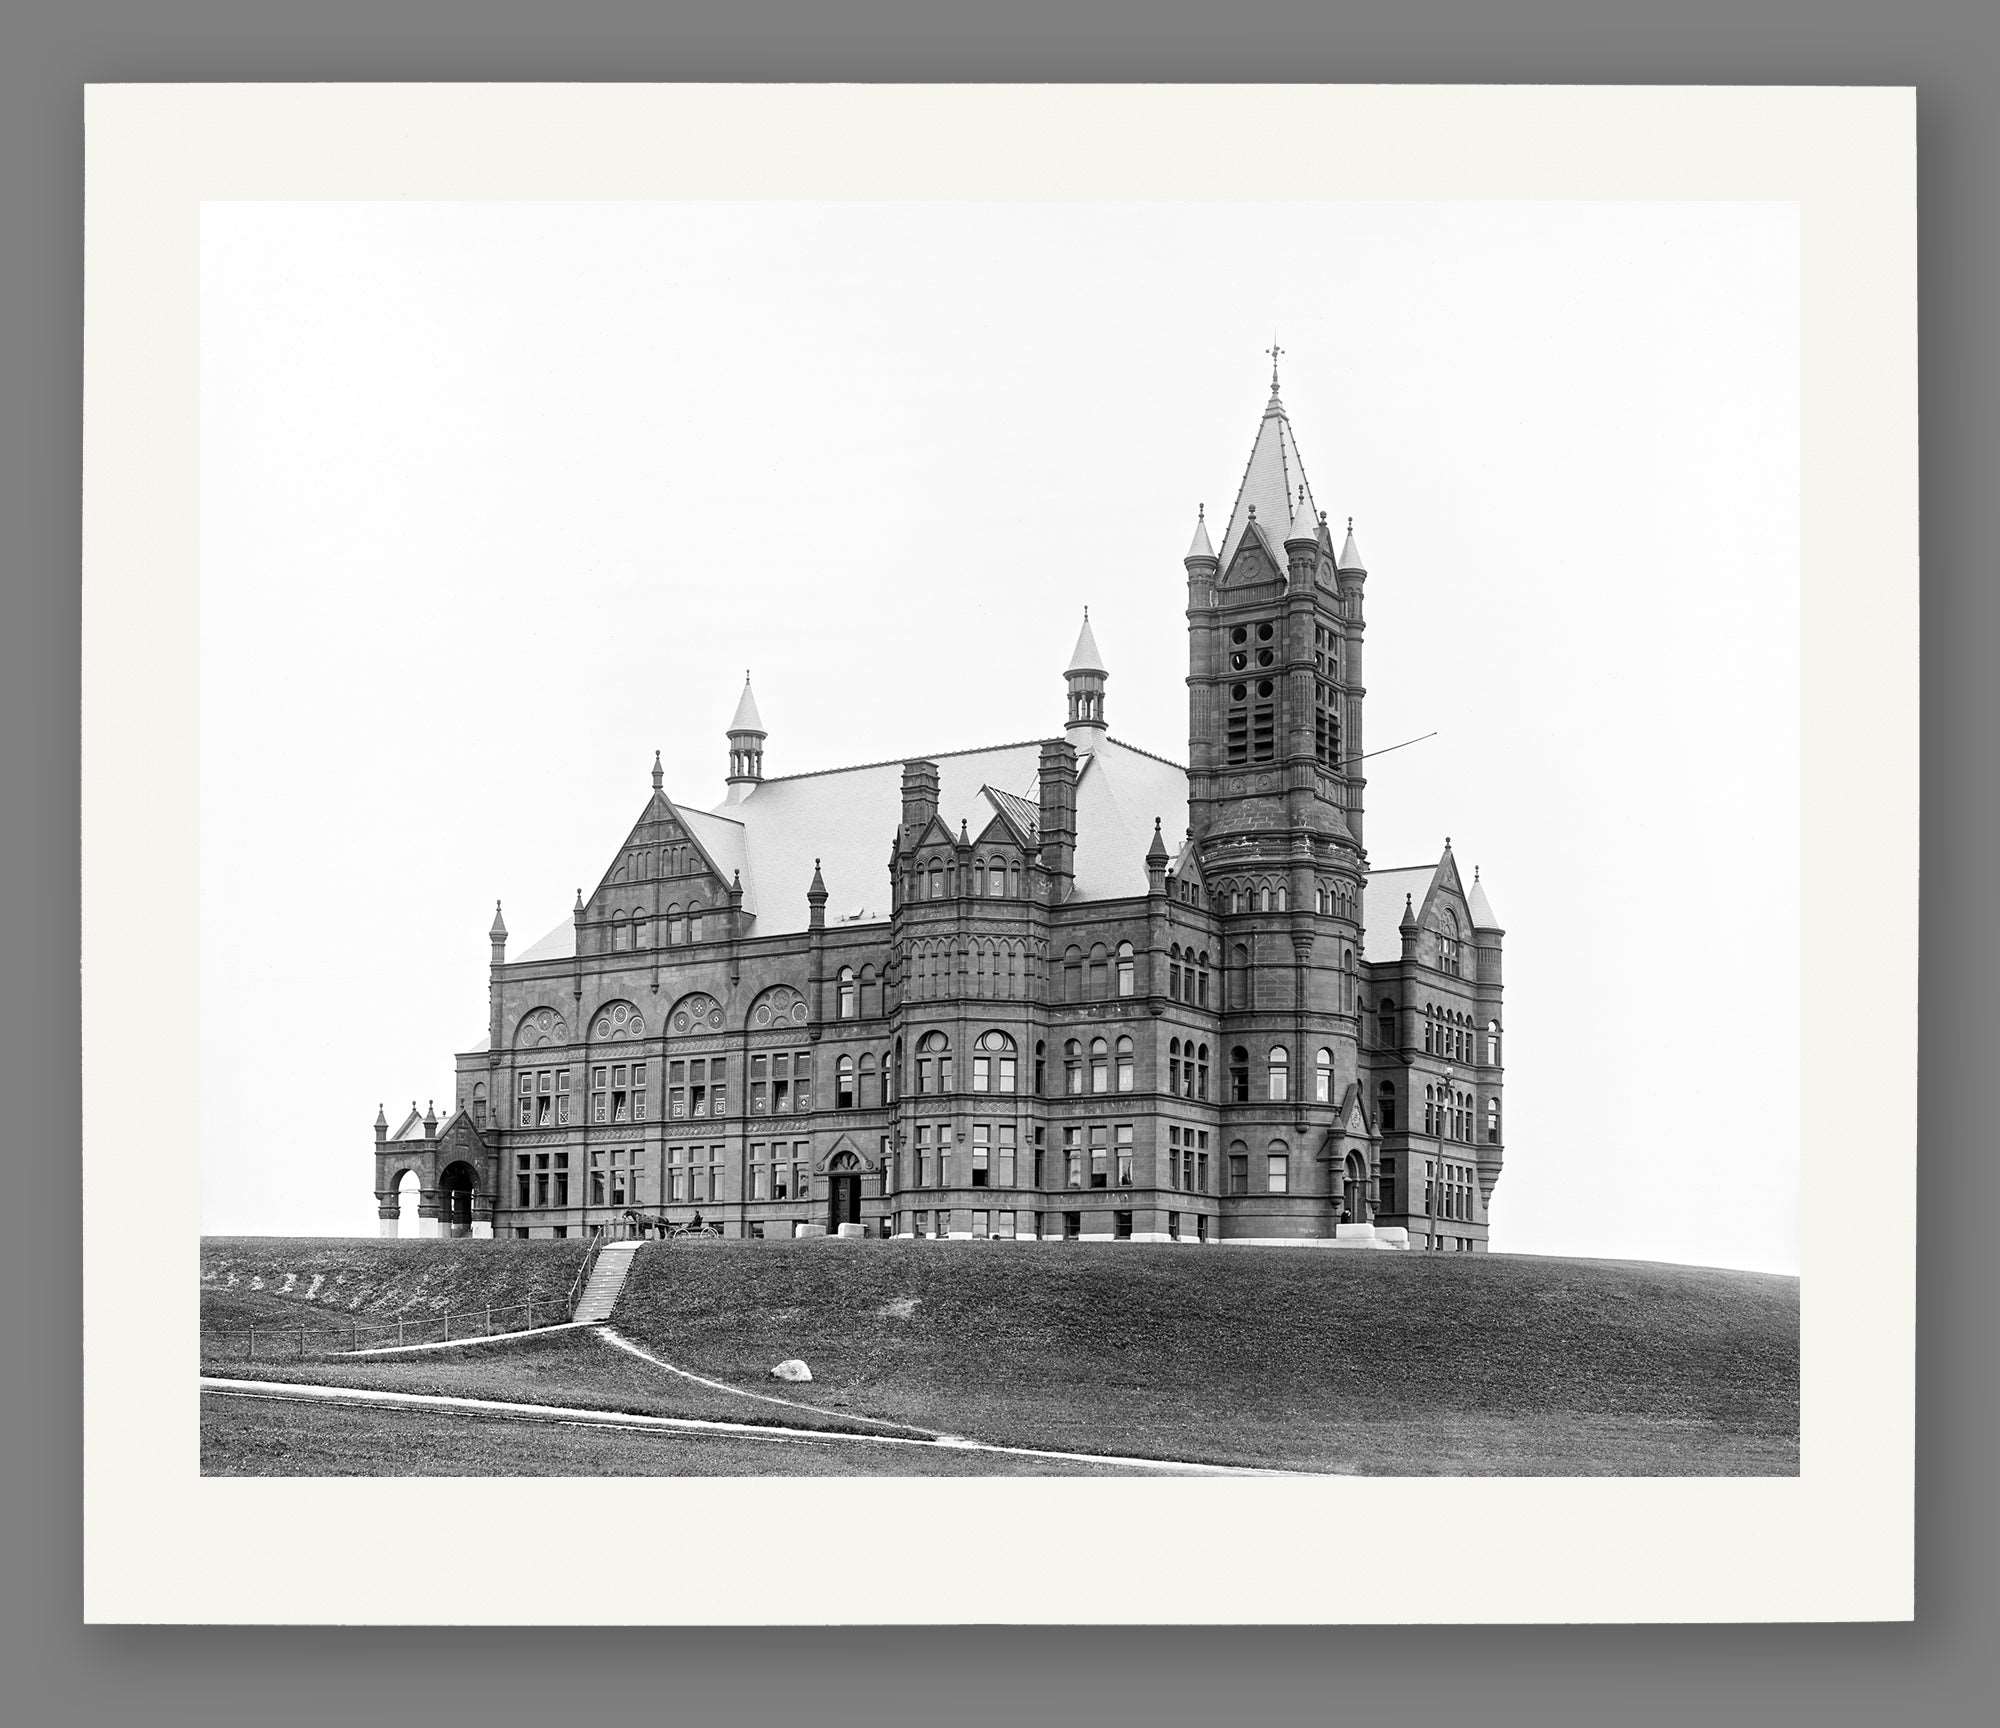 A fine art paper print of Syracuse University's Crouse Memorial College